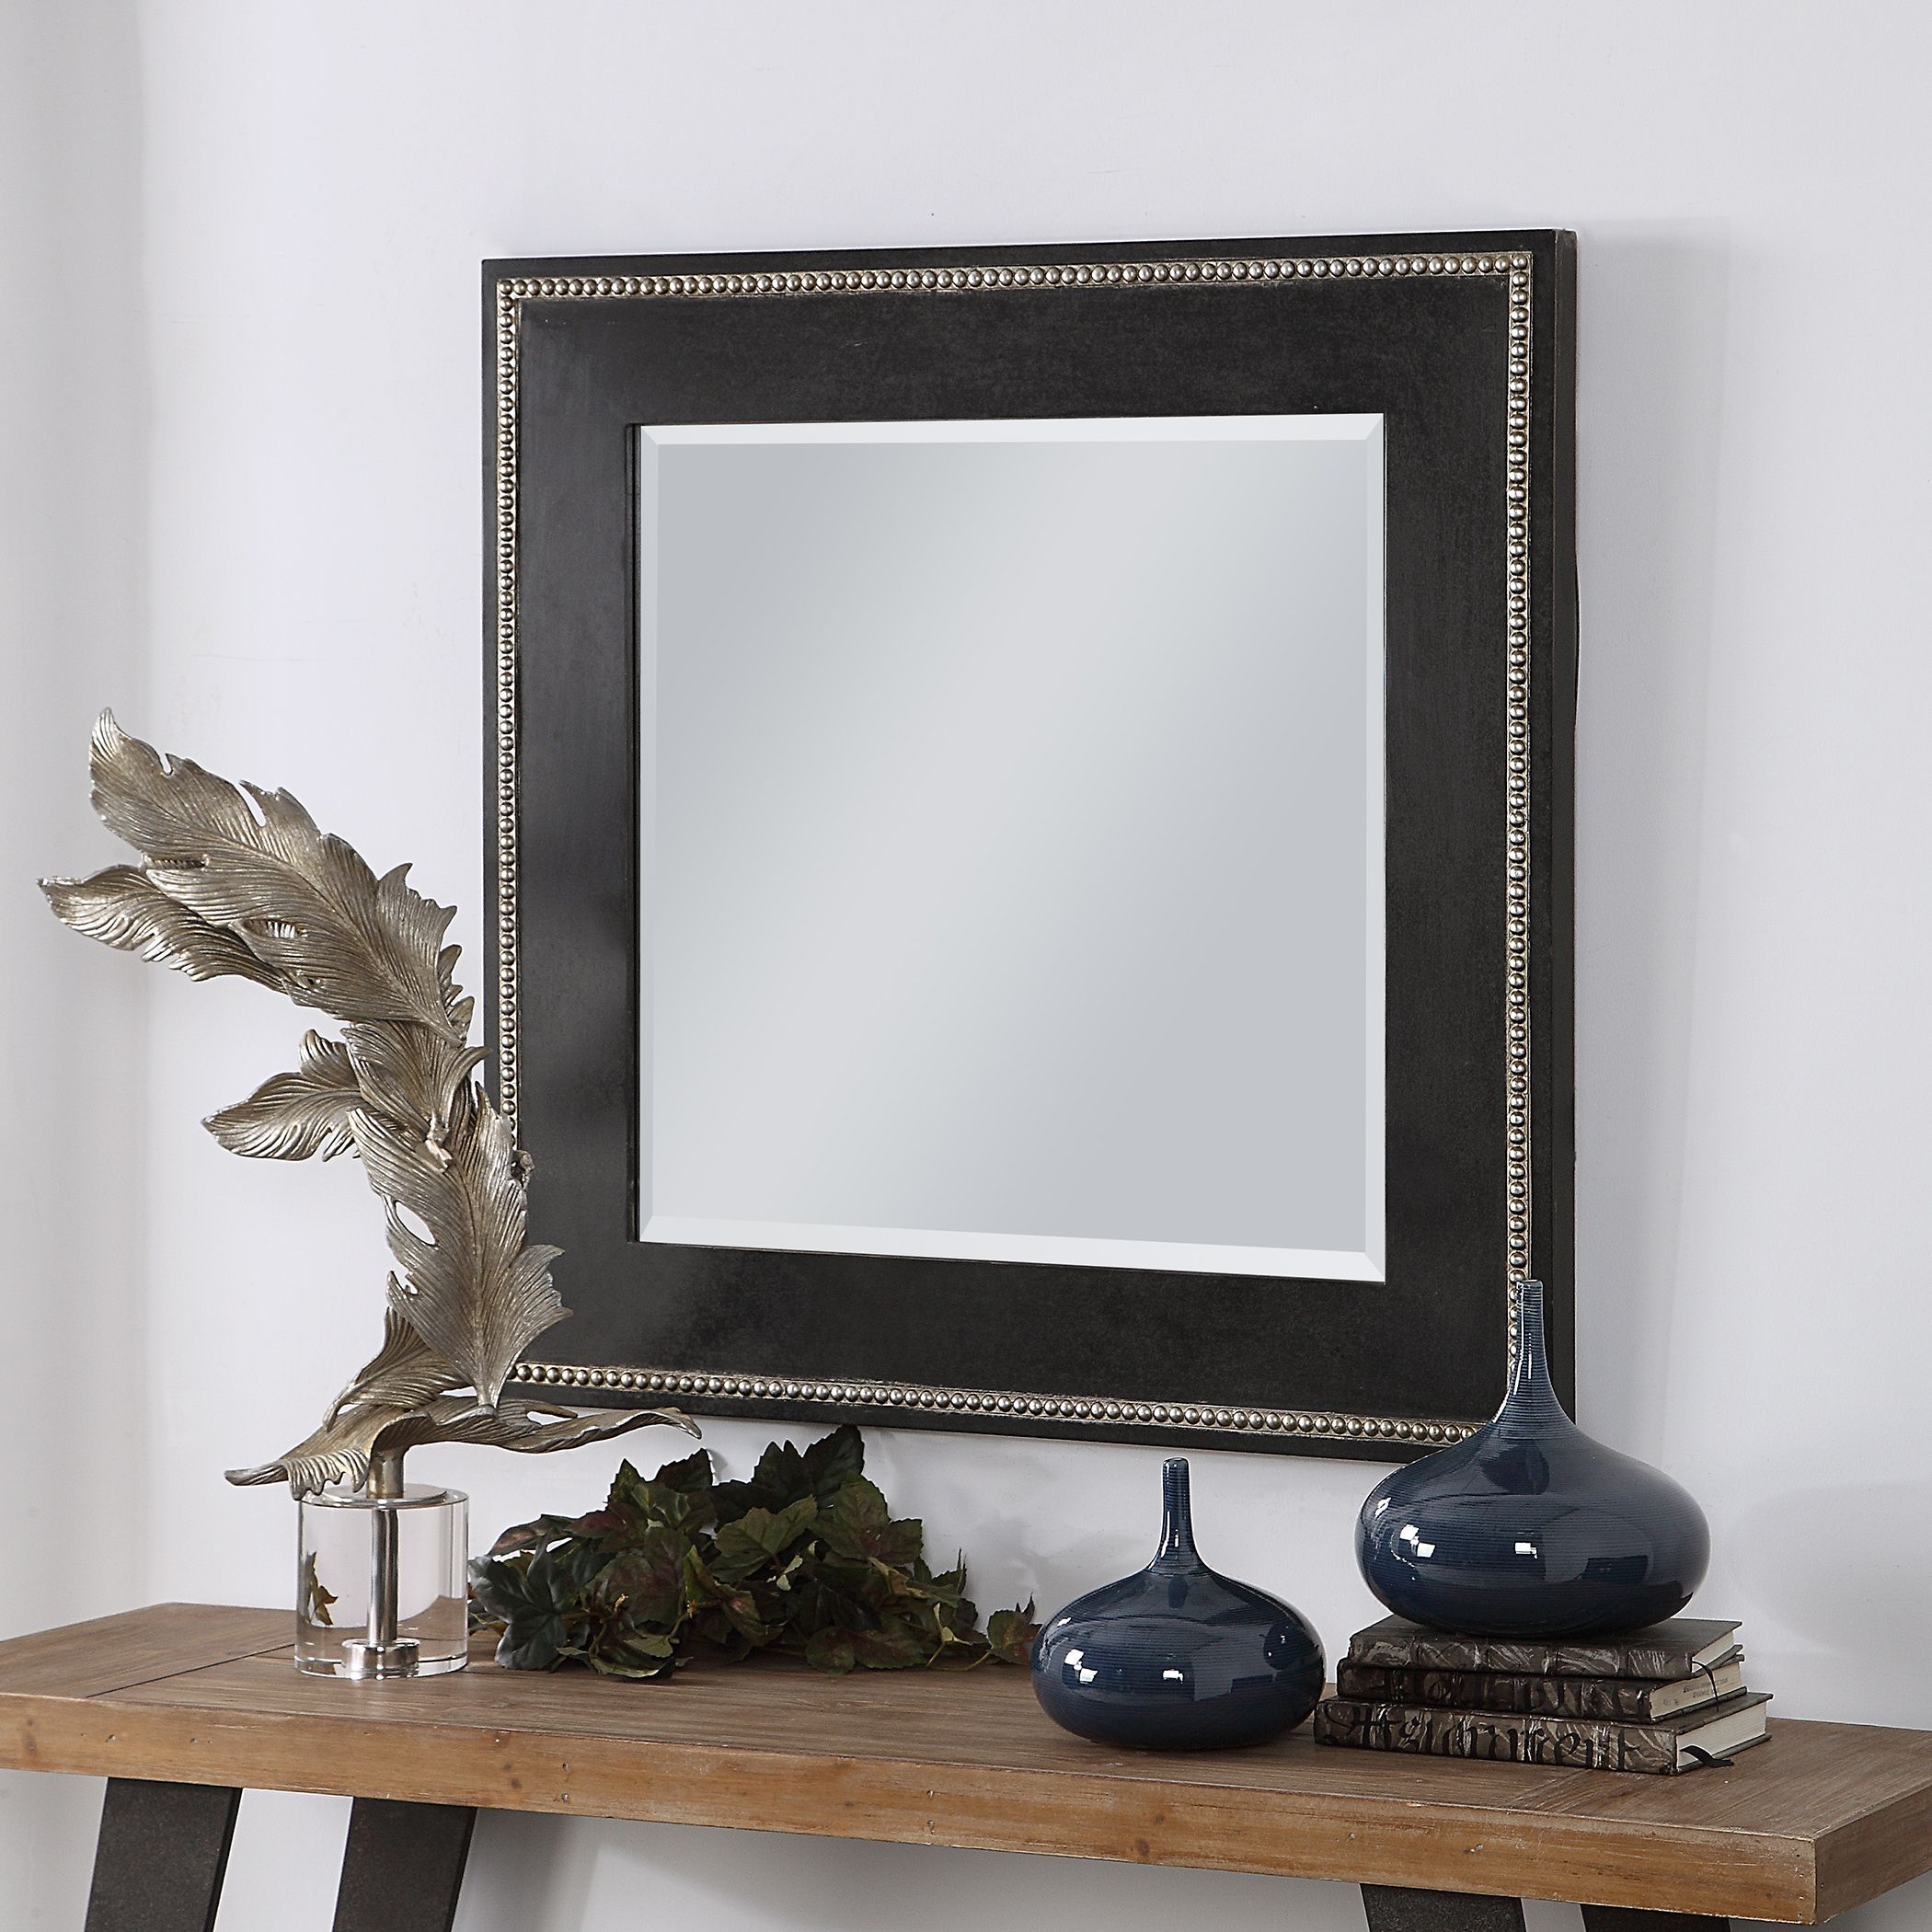 Large Black Square Beveled Wall Mirror Contemporary Style Traditional Intended For Traditional Beveled Wall Mirrors (View 2 of 15)